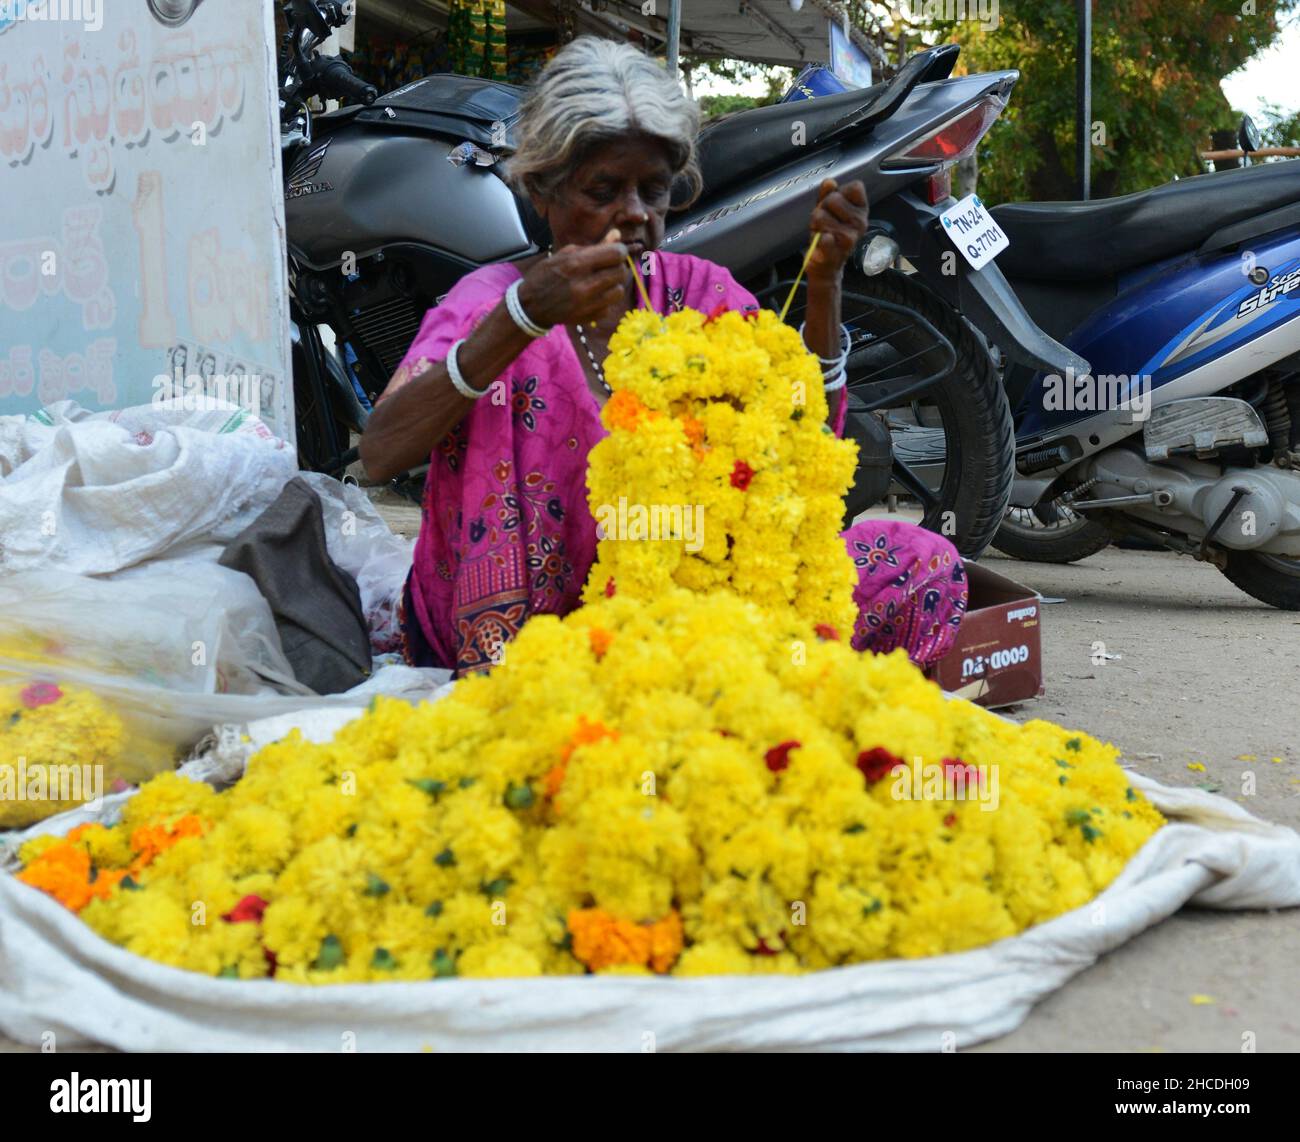 A colorful flower market in Kuppam, Andhra Pradesh, India. Stock Photo